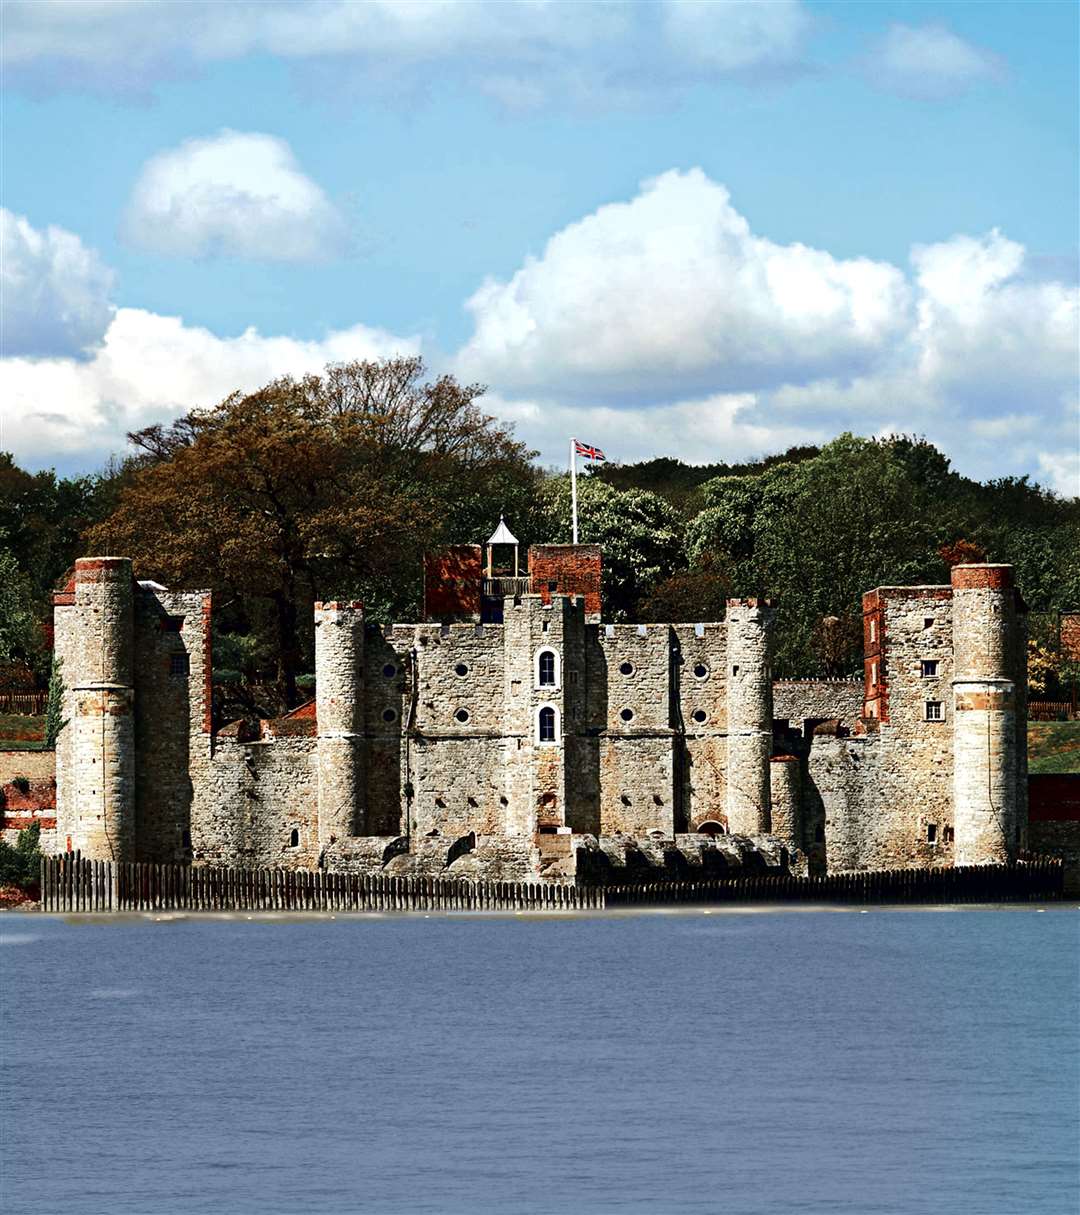 One of the fragrances is based on Upnor and its surrounds